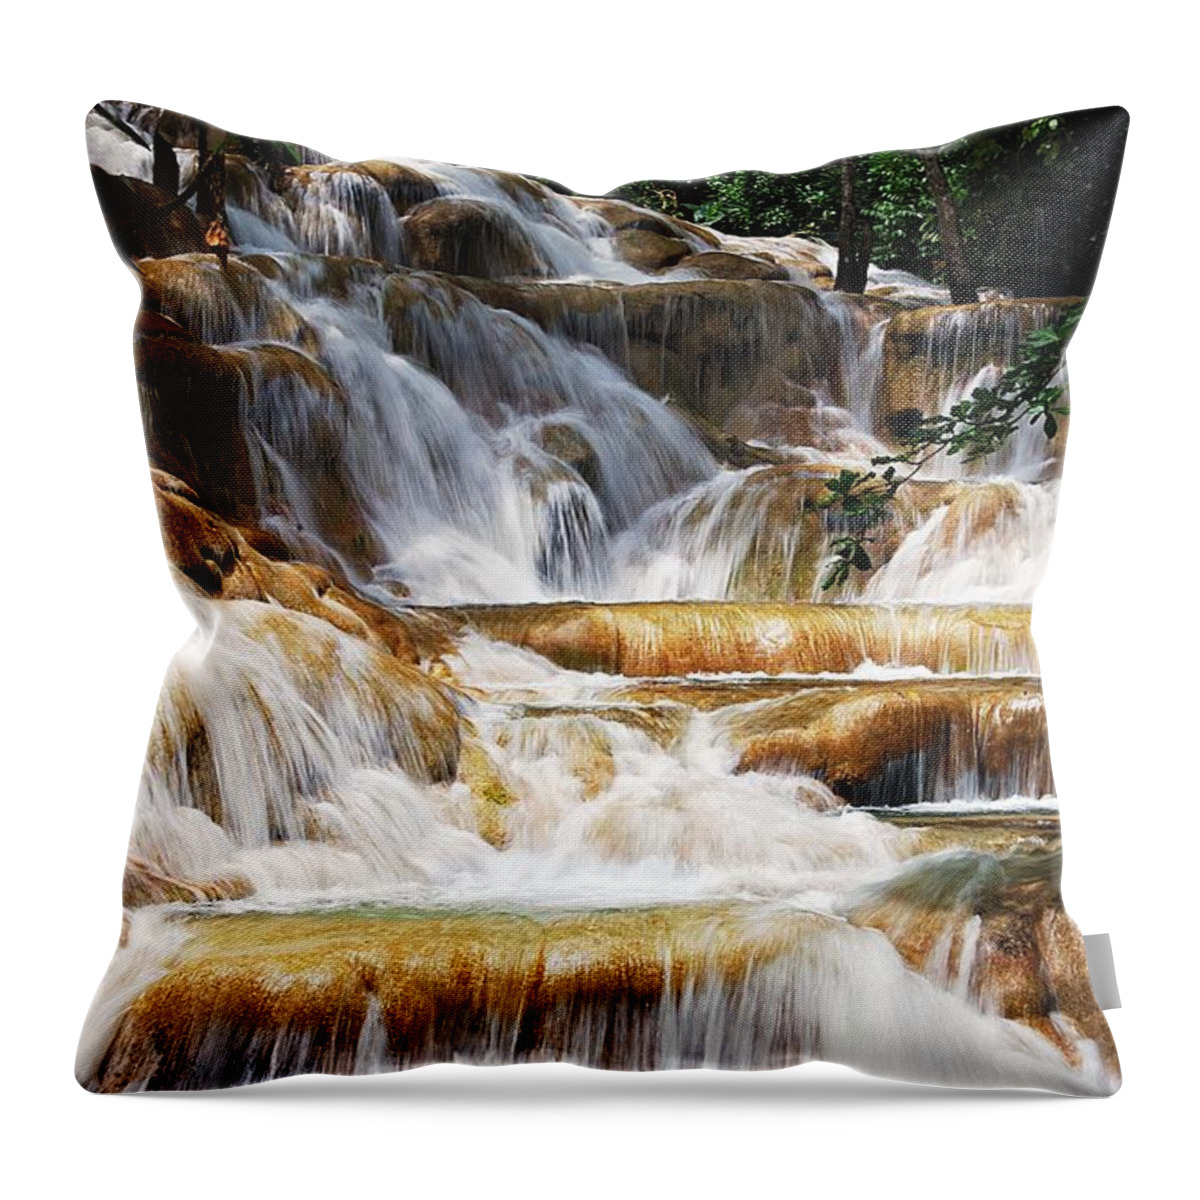 Waterfall Throw Pillow featuring the photograph Dunn Falls by Hannes Cmarits